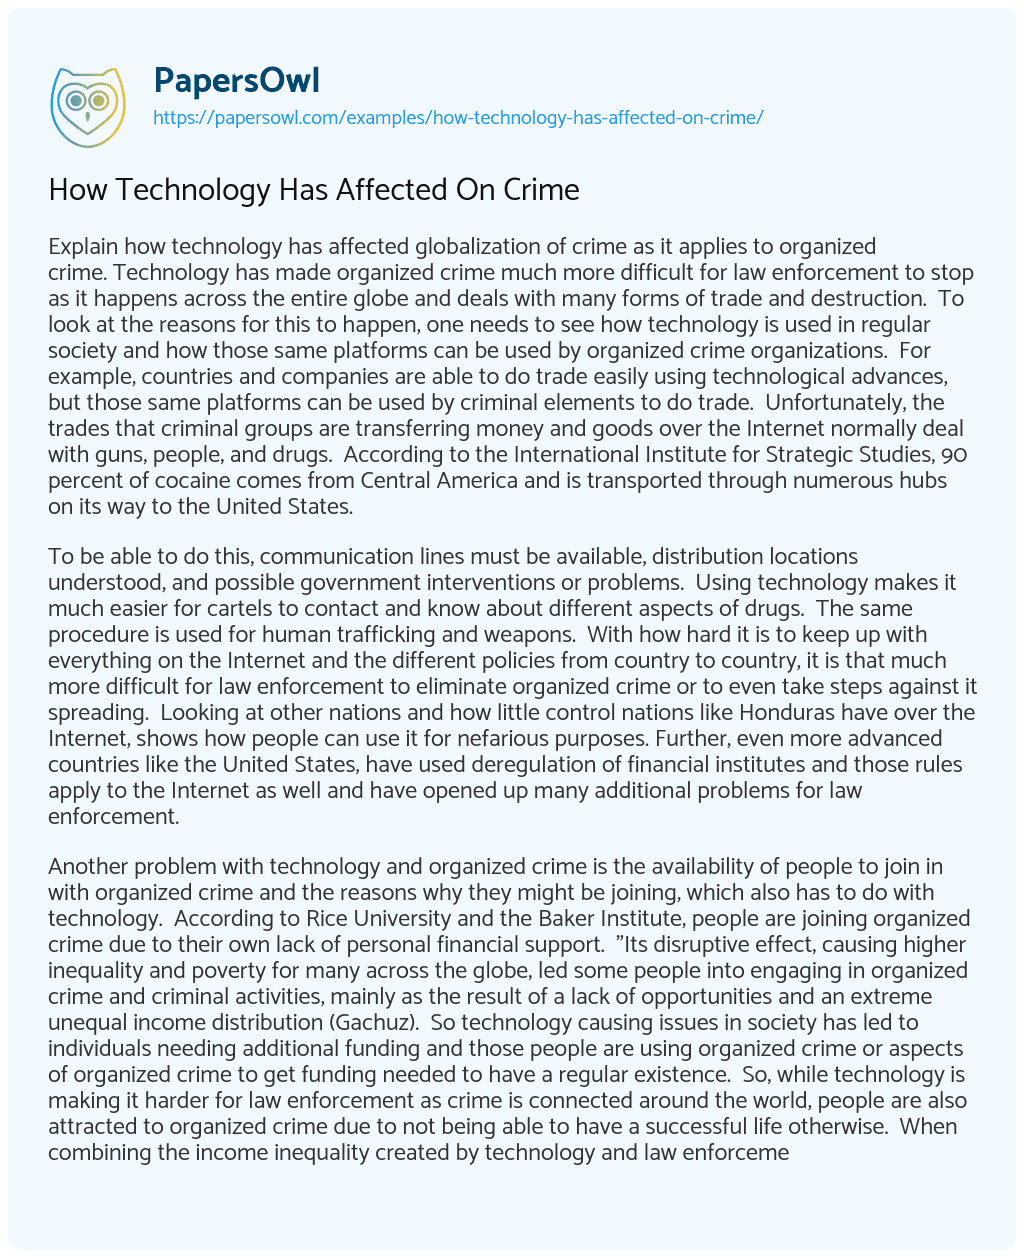 Essay on How Technology has Affected on Crime